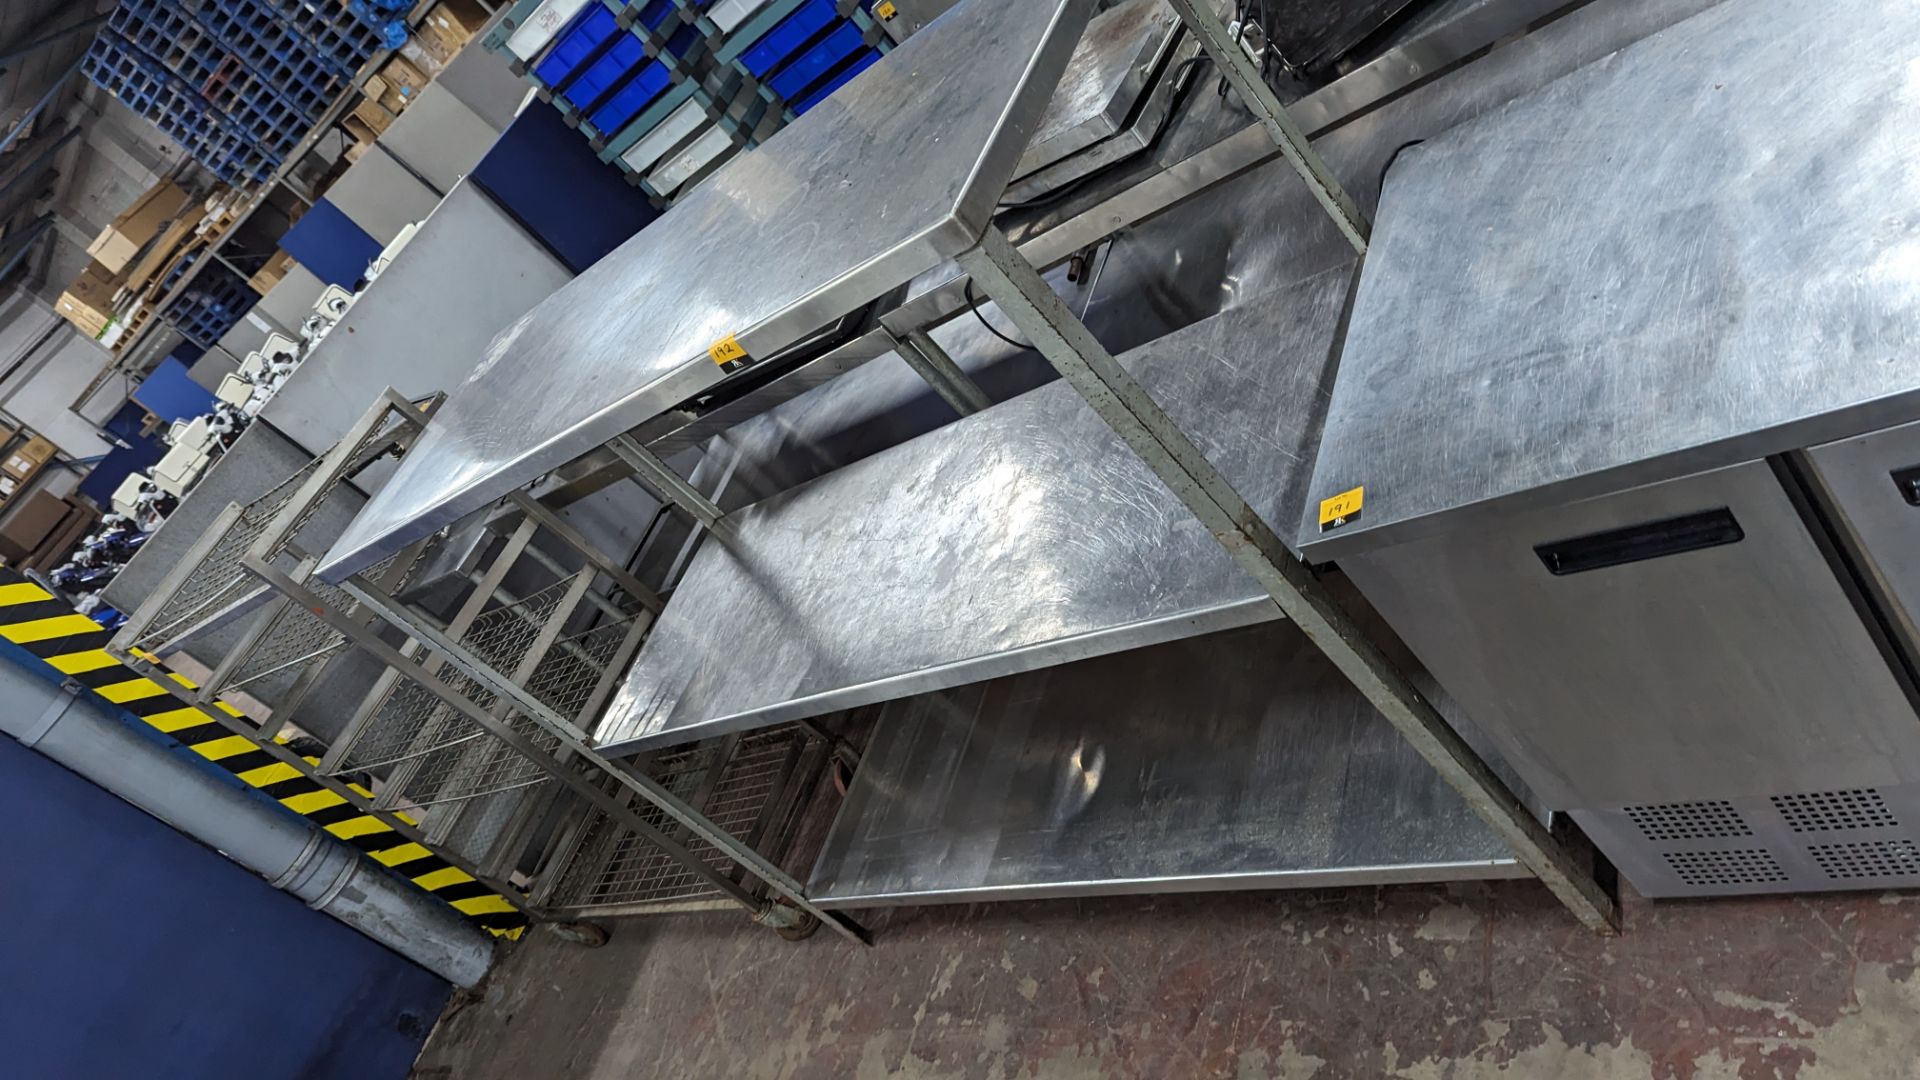 Shelving unit with 3 stainless steel shelves. Max dimensions approx. 1670mm x 630mm x 1400mm - Image 2 of 5